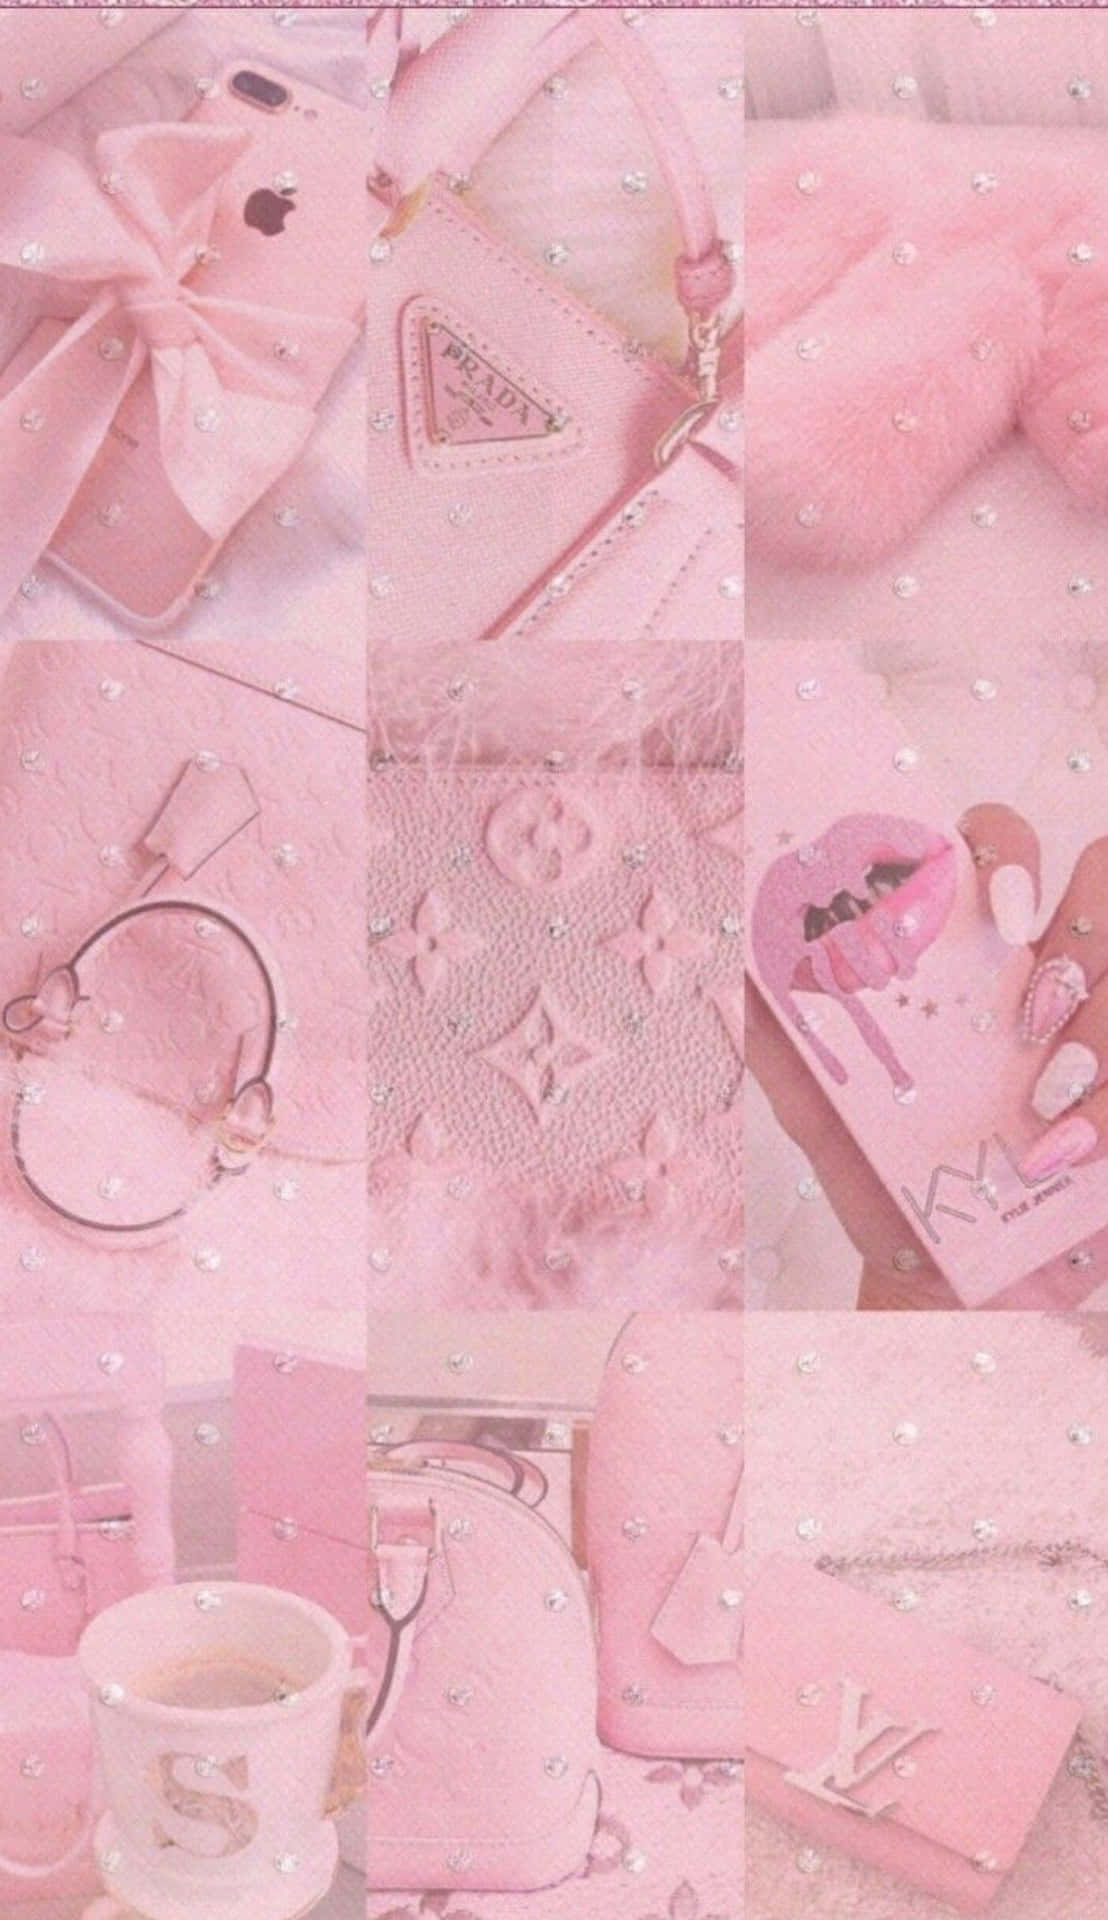 Girly wallpaper aesthetic background phone background - Pink collage